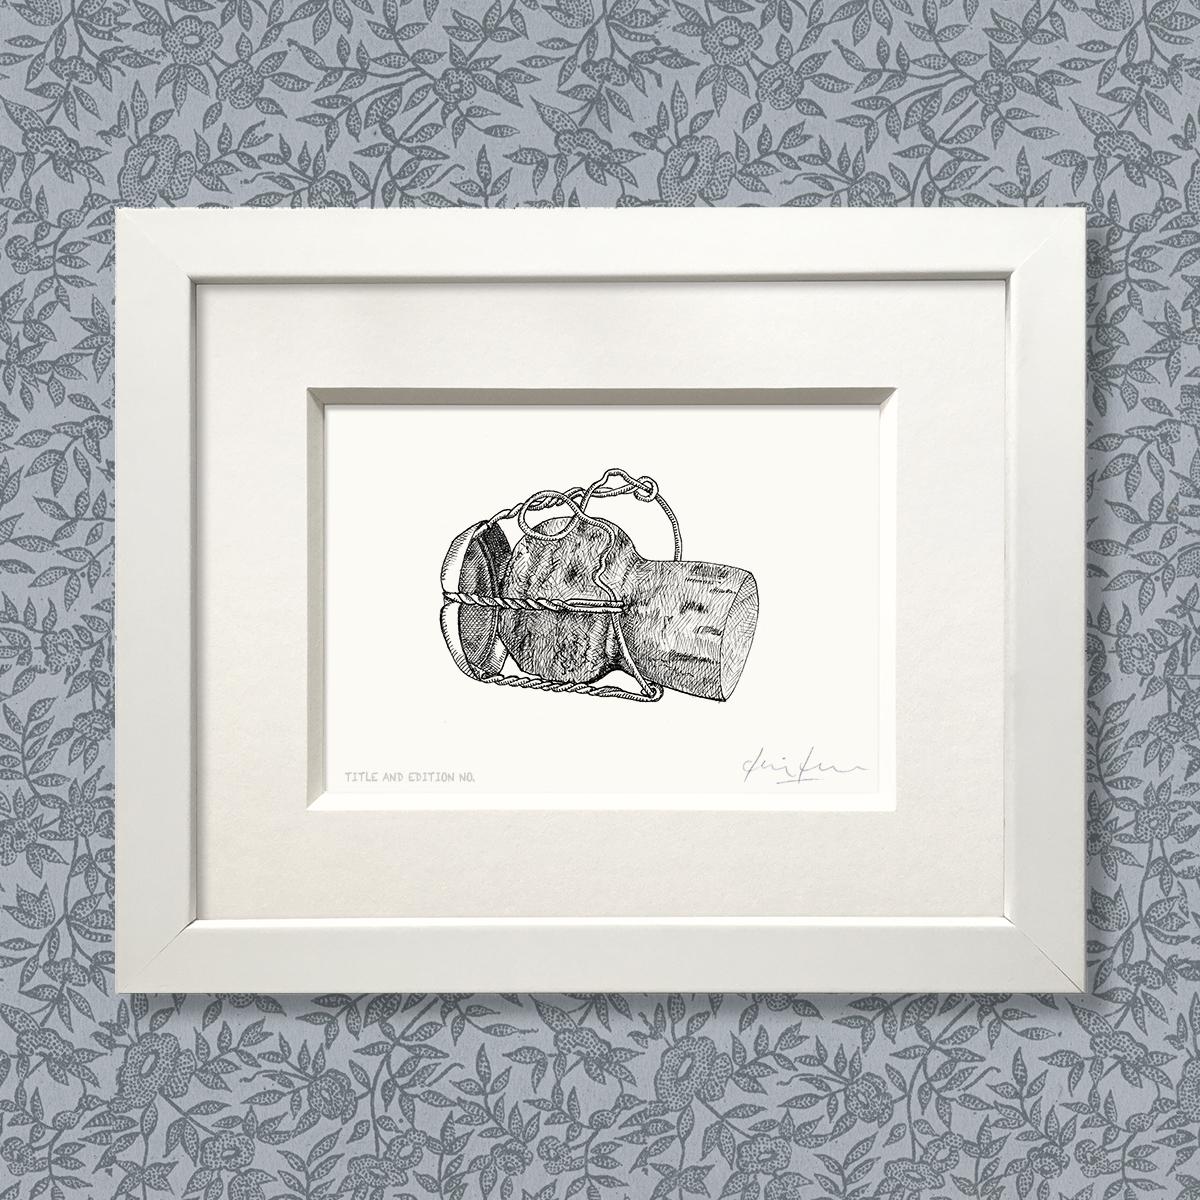 Limited edition print from pen and ink drawing of a champagne cork in a white frame